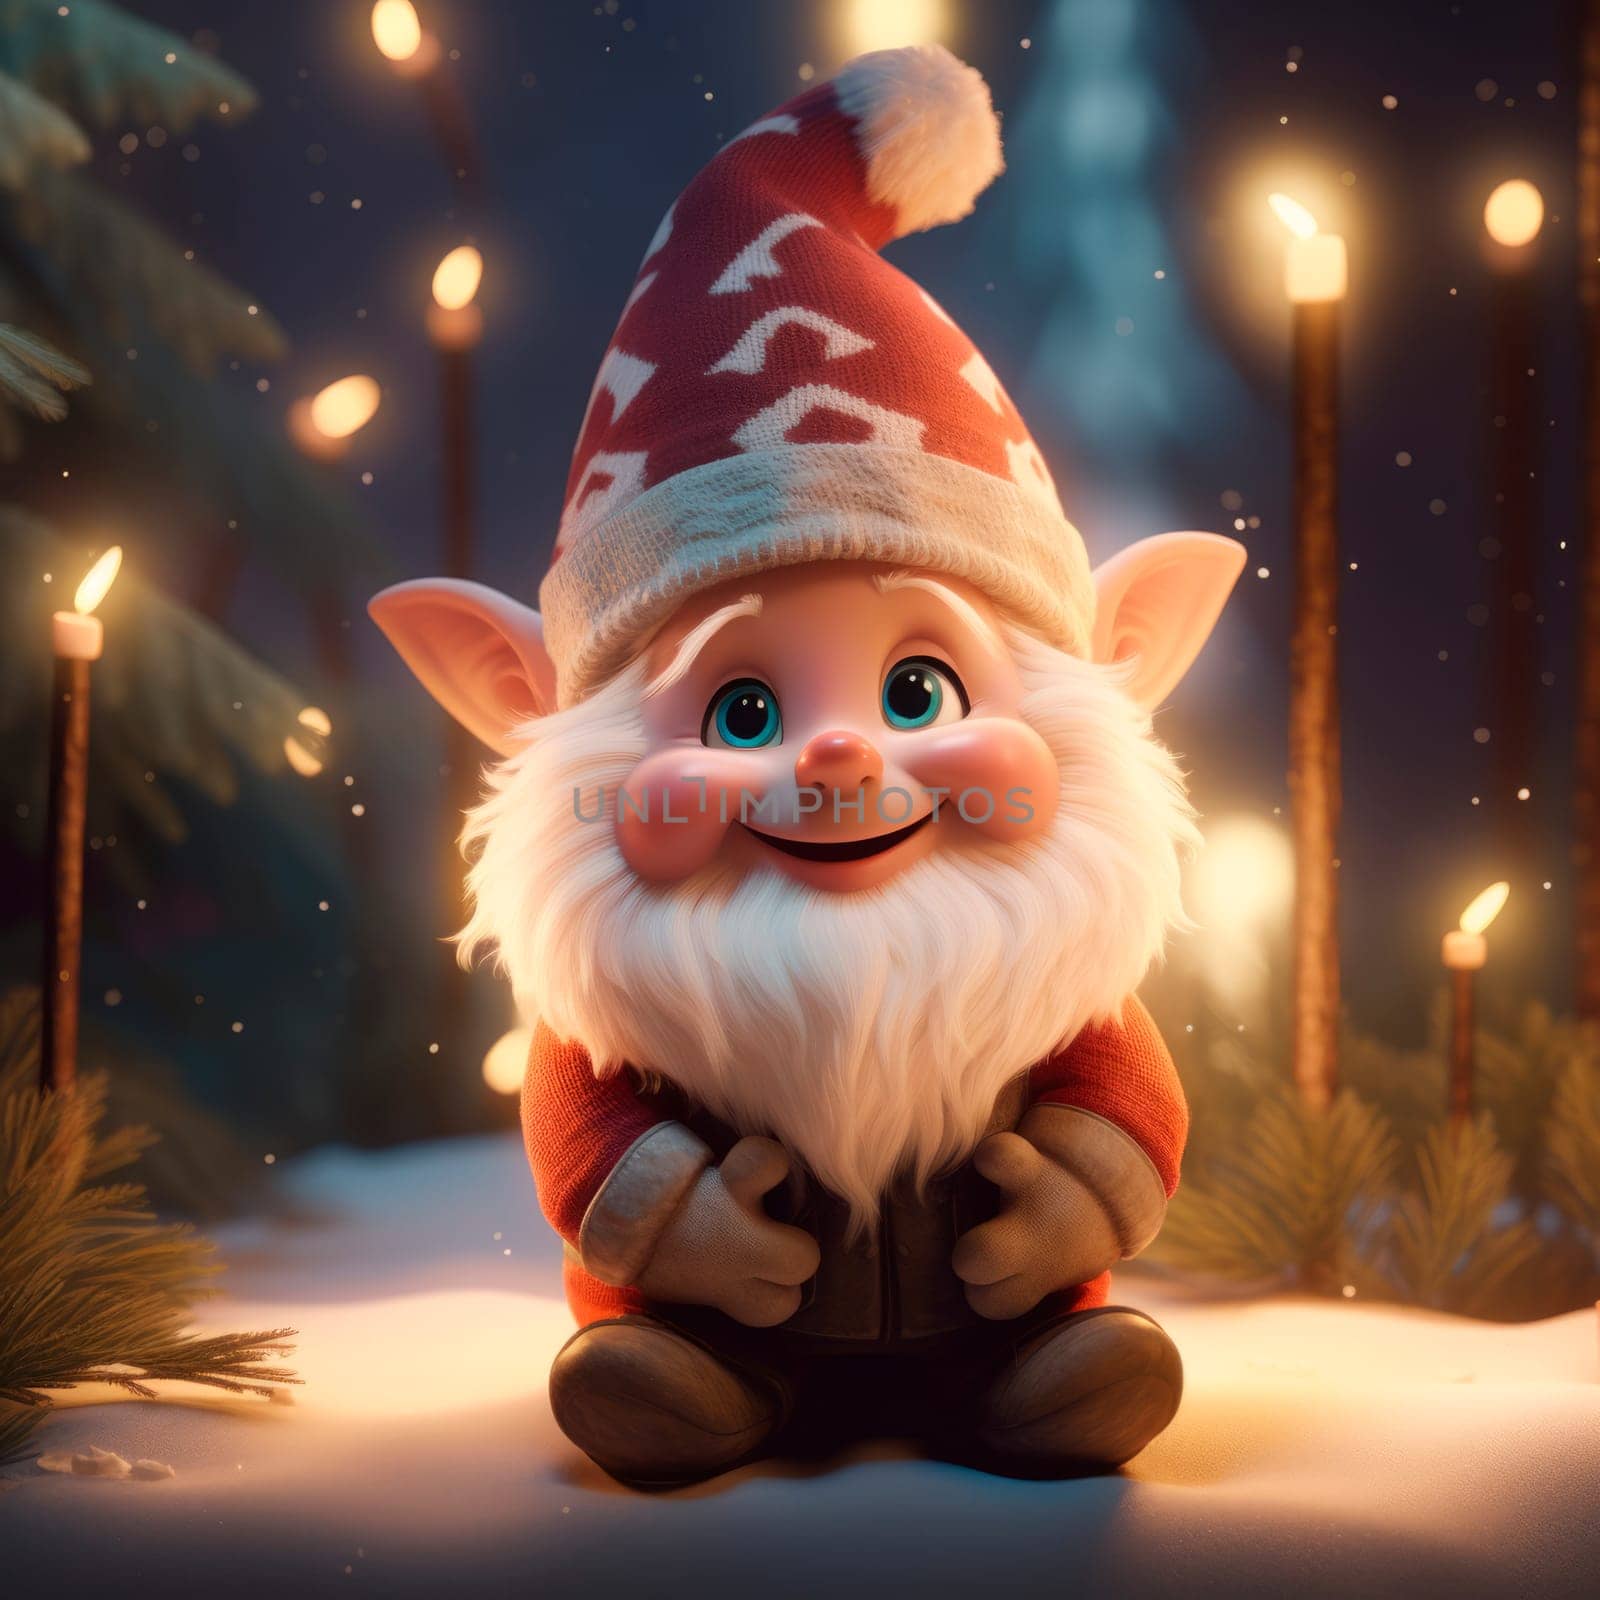 Cute Christmas gnome on a New Year's background. by Spirina